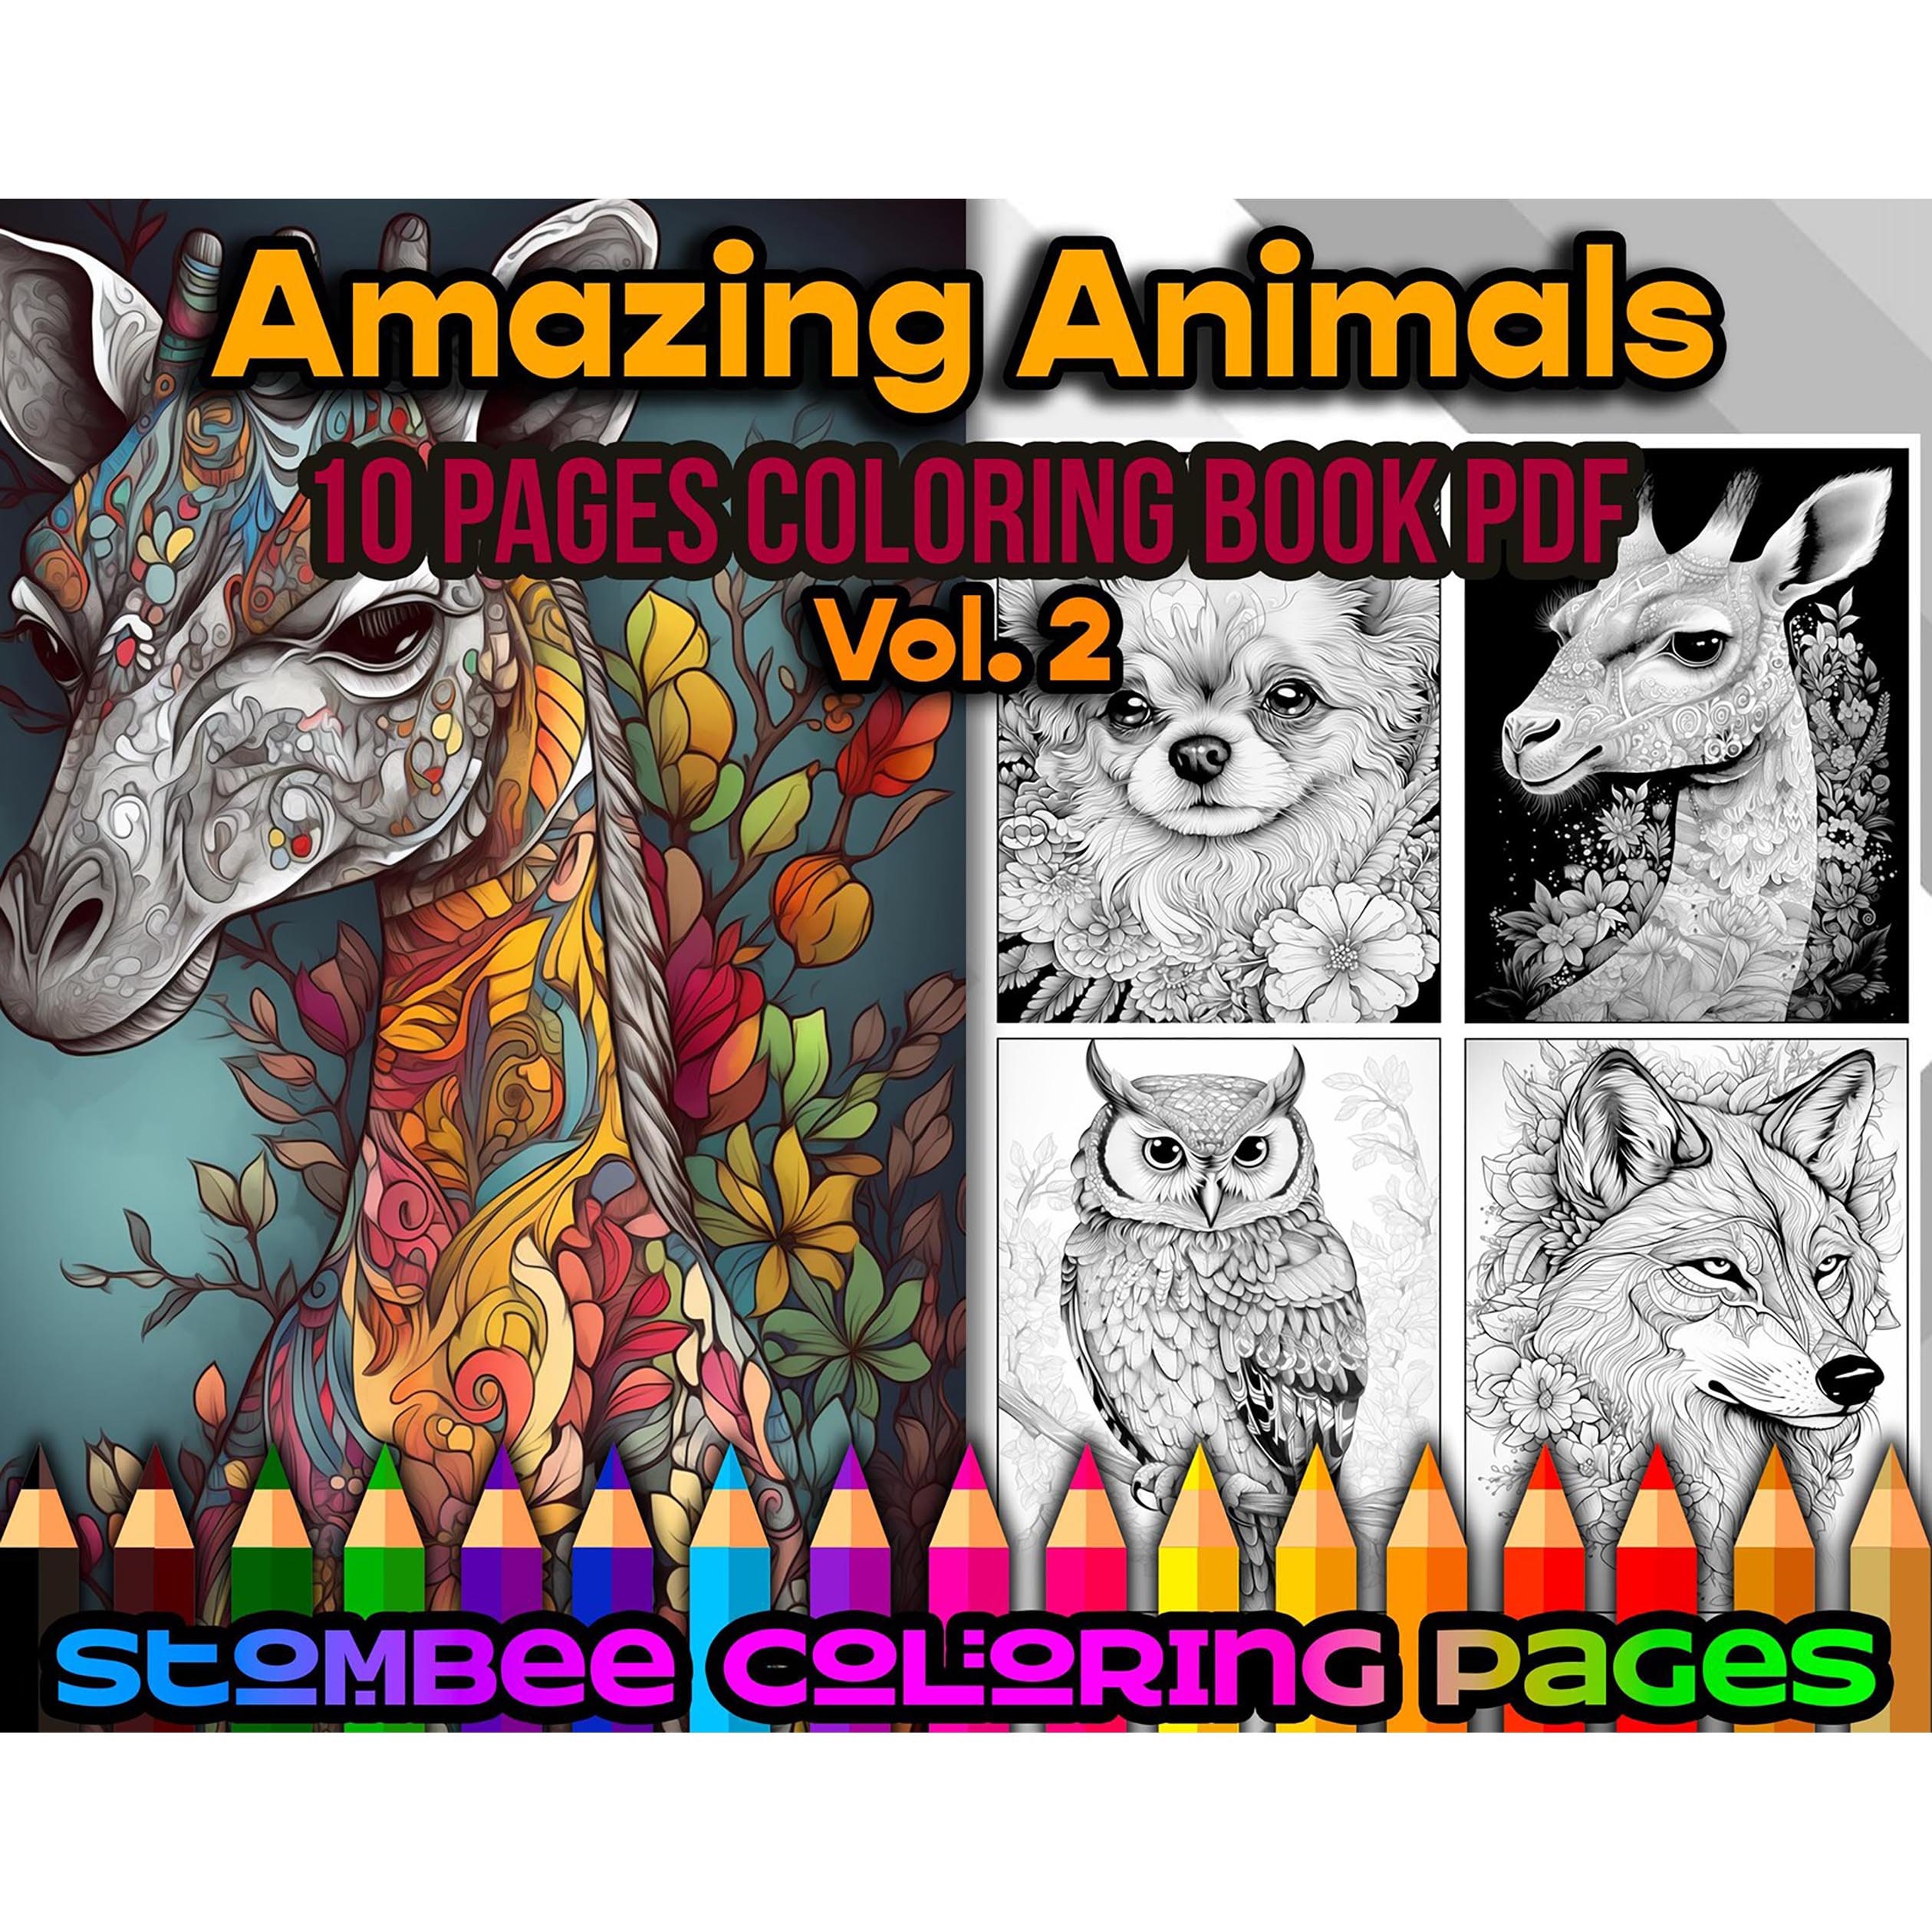 Animal Coloring Book For Adults Vol 2 (Paperback)